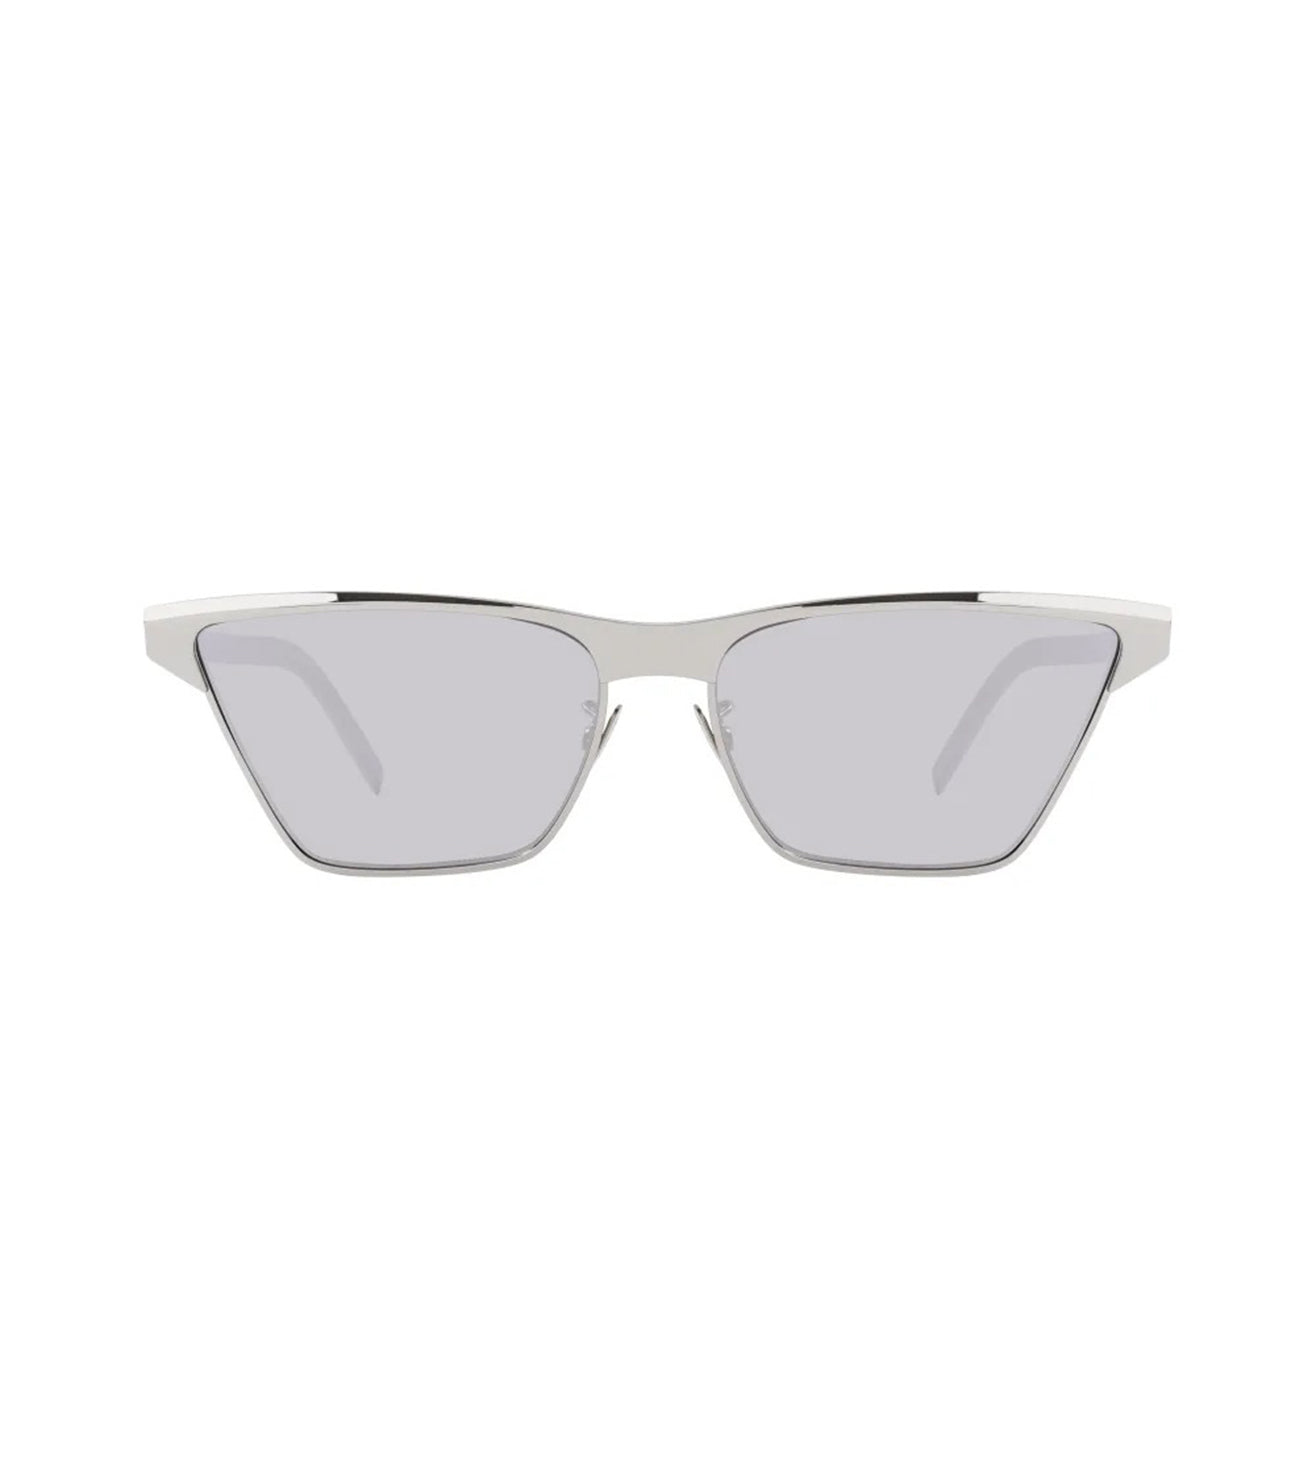 Givenchy Women's Grey Butterfly Sunglasses